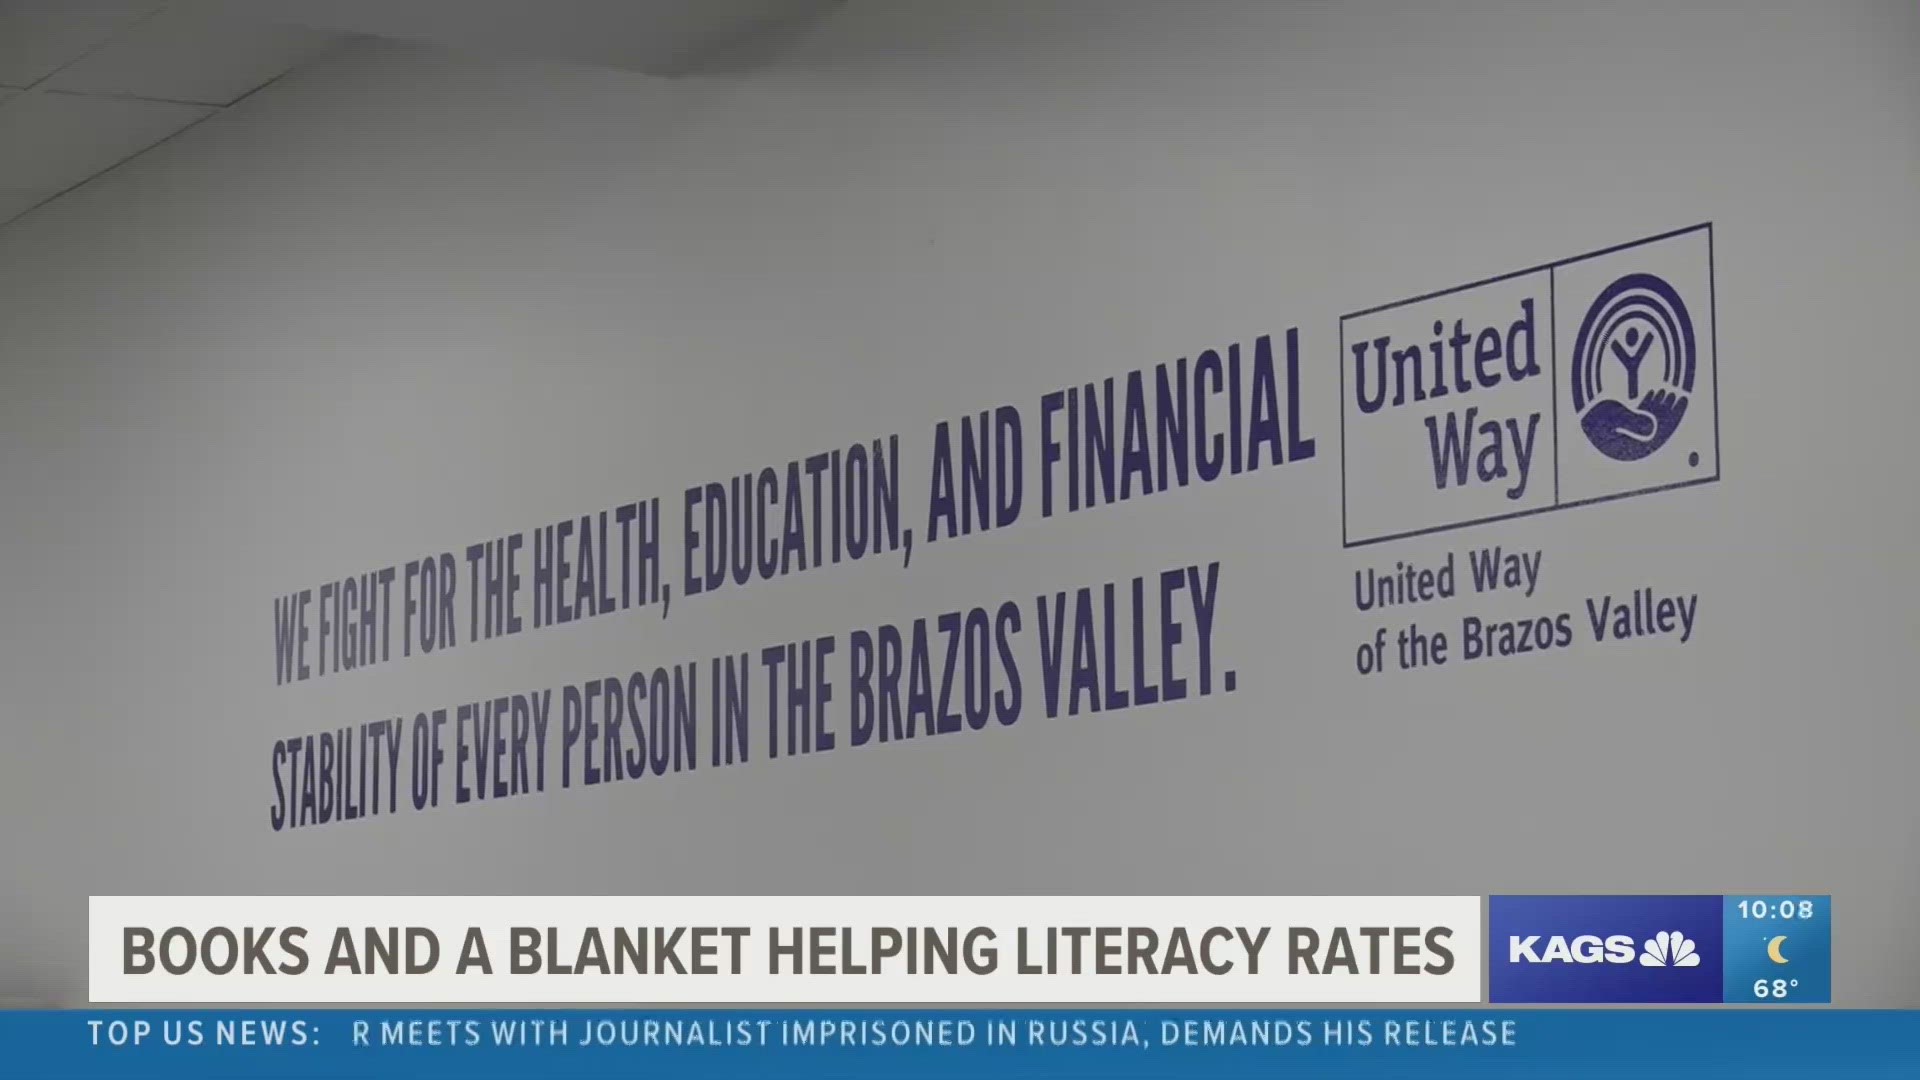 In 2022, the Books and a Blanket campaign that was held was a successful one, and the organization hopes to provide even more in their upcoming drive.